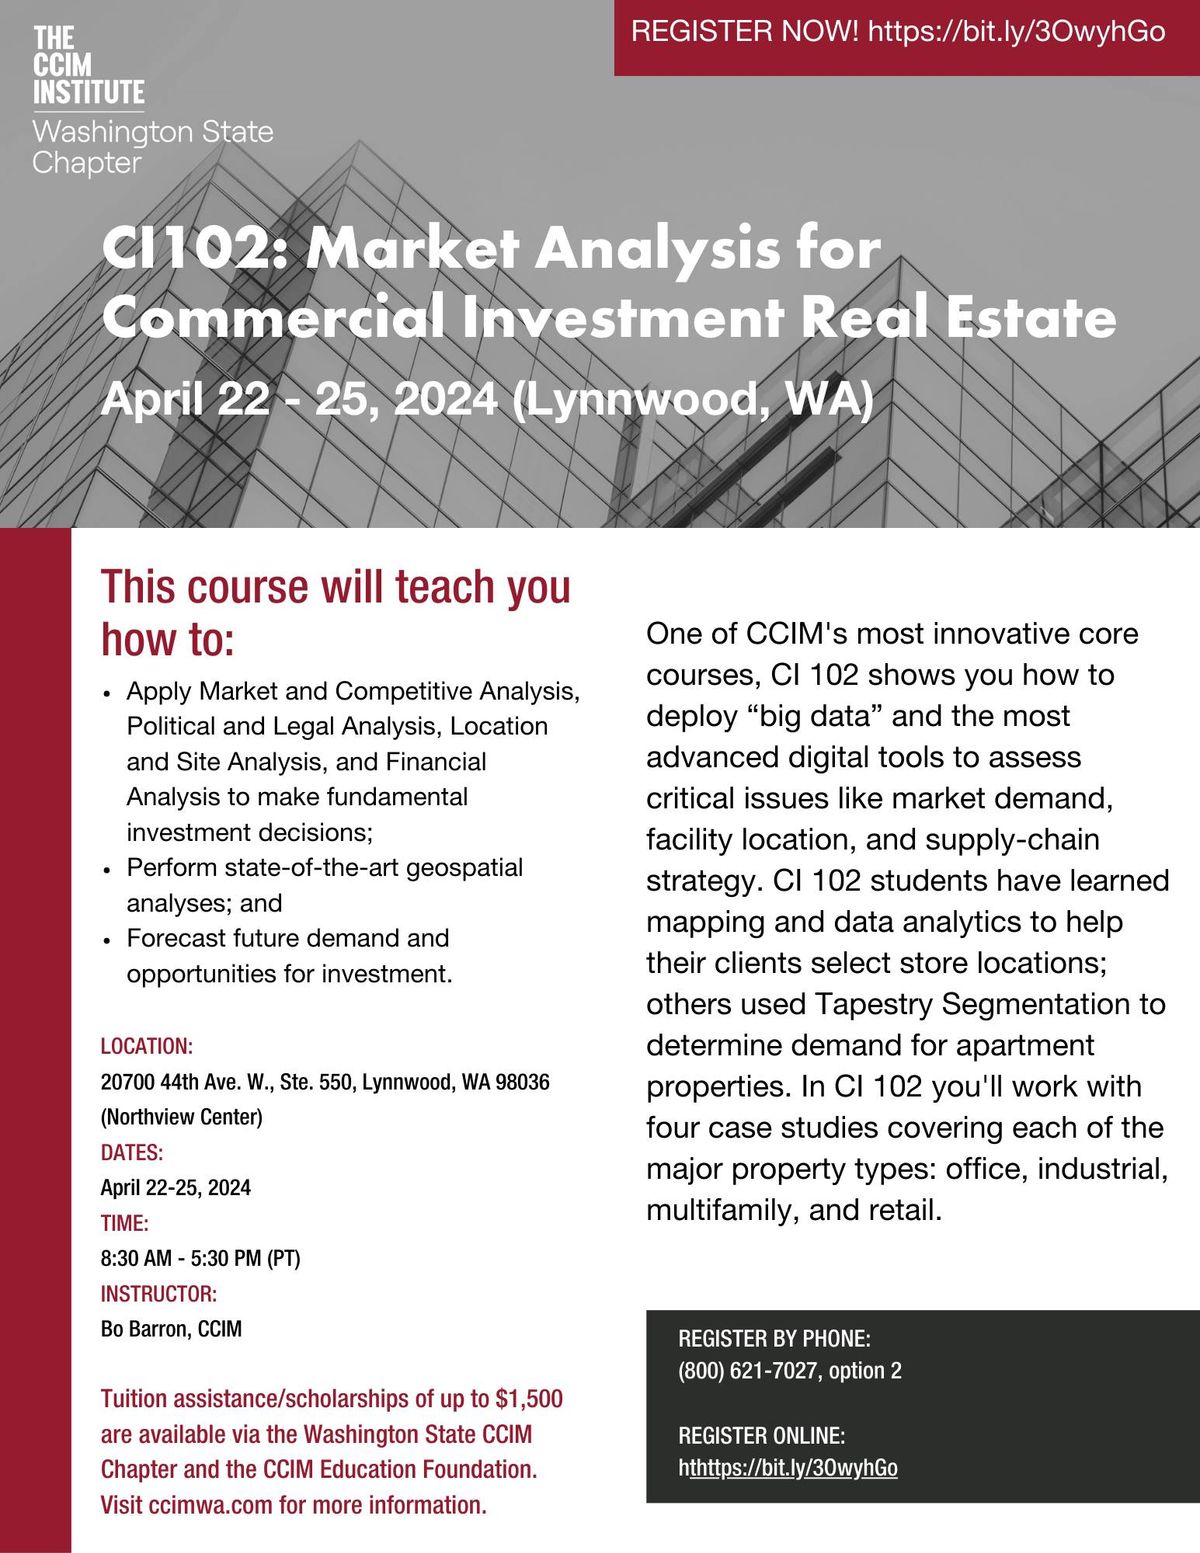 CCIM-WA: CI102 Market Analysis for Commercial Investment Real Estate